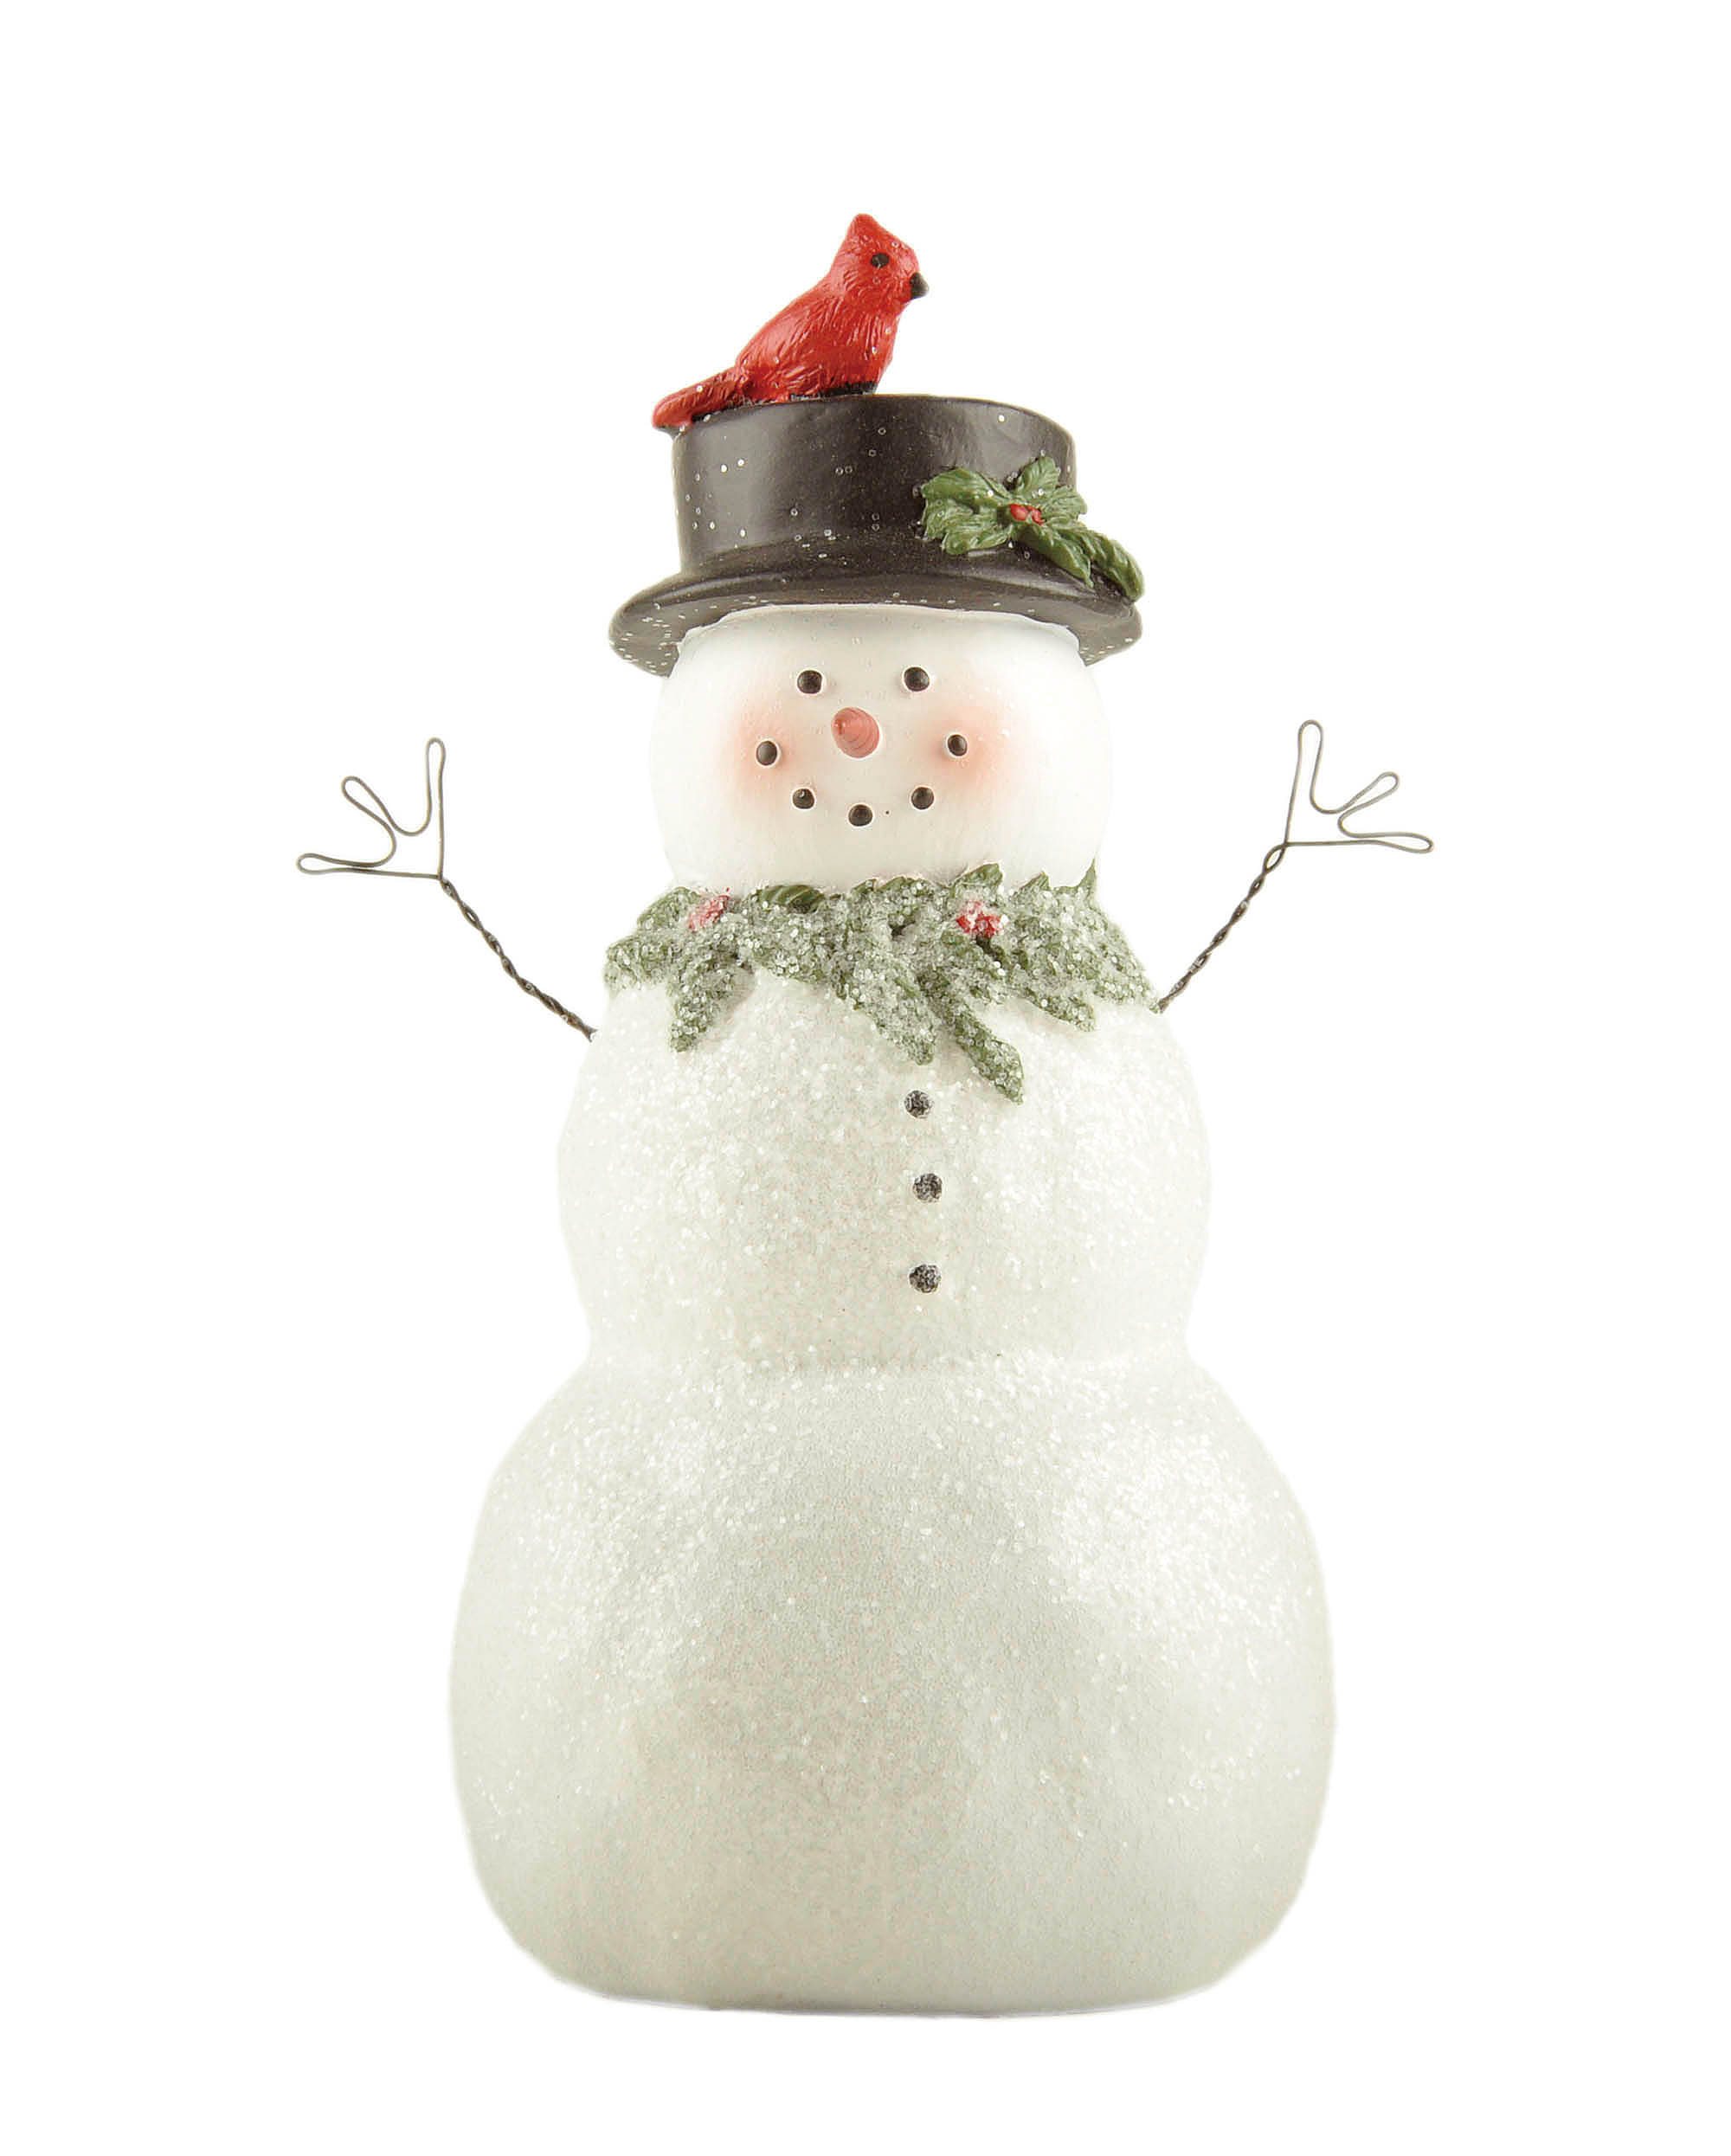 Whimsical Resin Snowman Figurine with Top Hat and Red Bird – Delightful Sparkling Christmas Decoration for Holiday Decor 238-13812